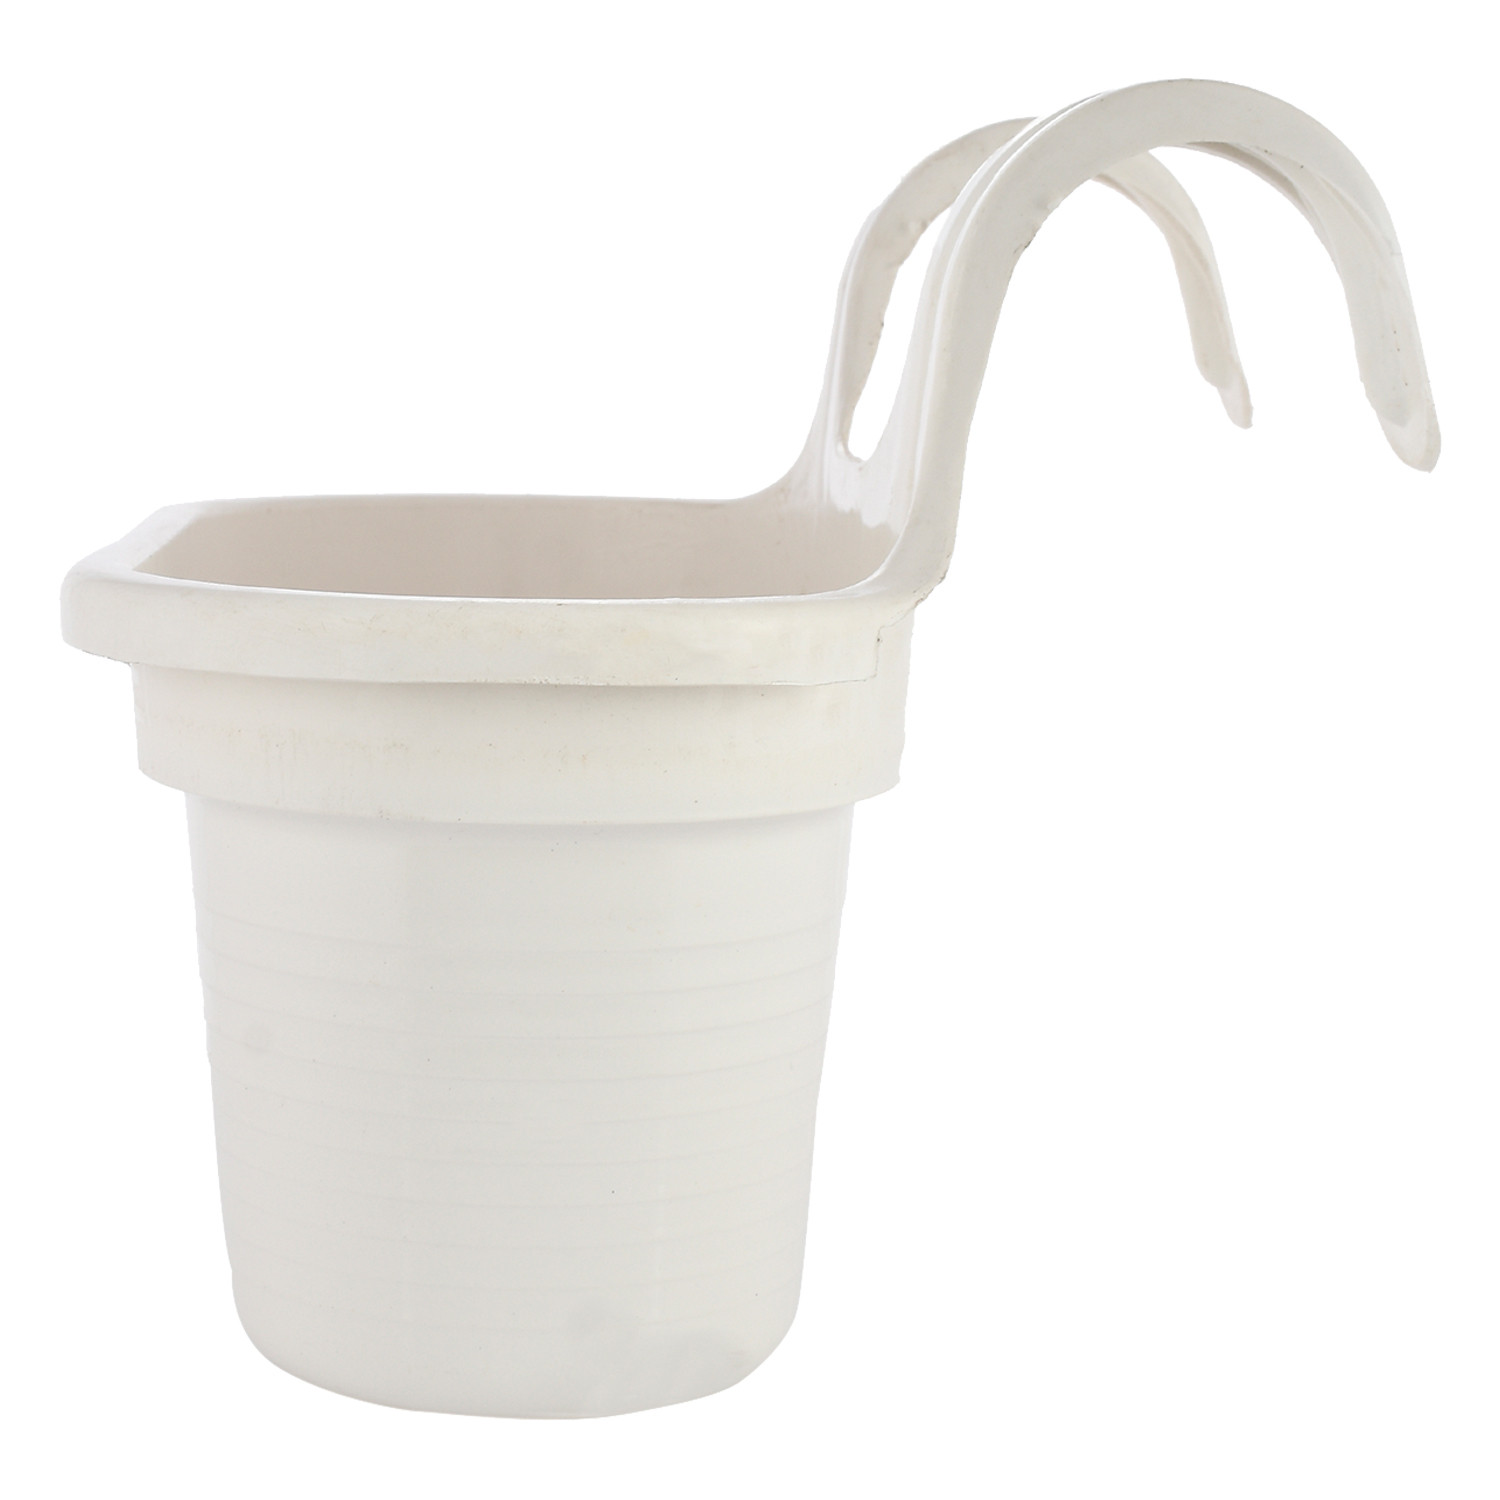 Kuber Industries Hanging Flower Pot|Double Hook Plant Container|Durable Plastic Glossy Finish Pots for Home|Balcony|Garden|12 Inch|Pack of 2 (White & Red)